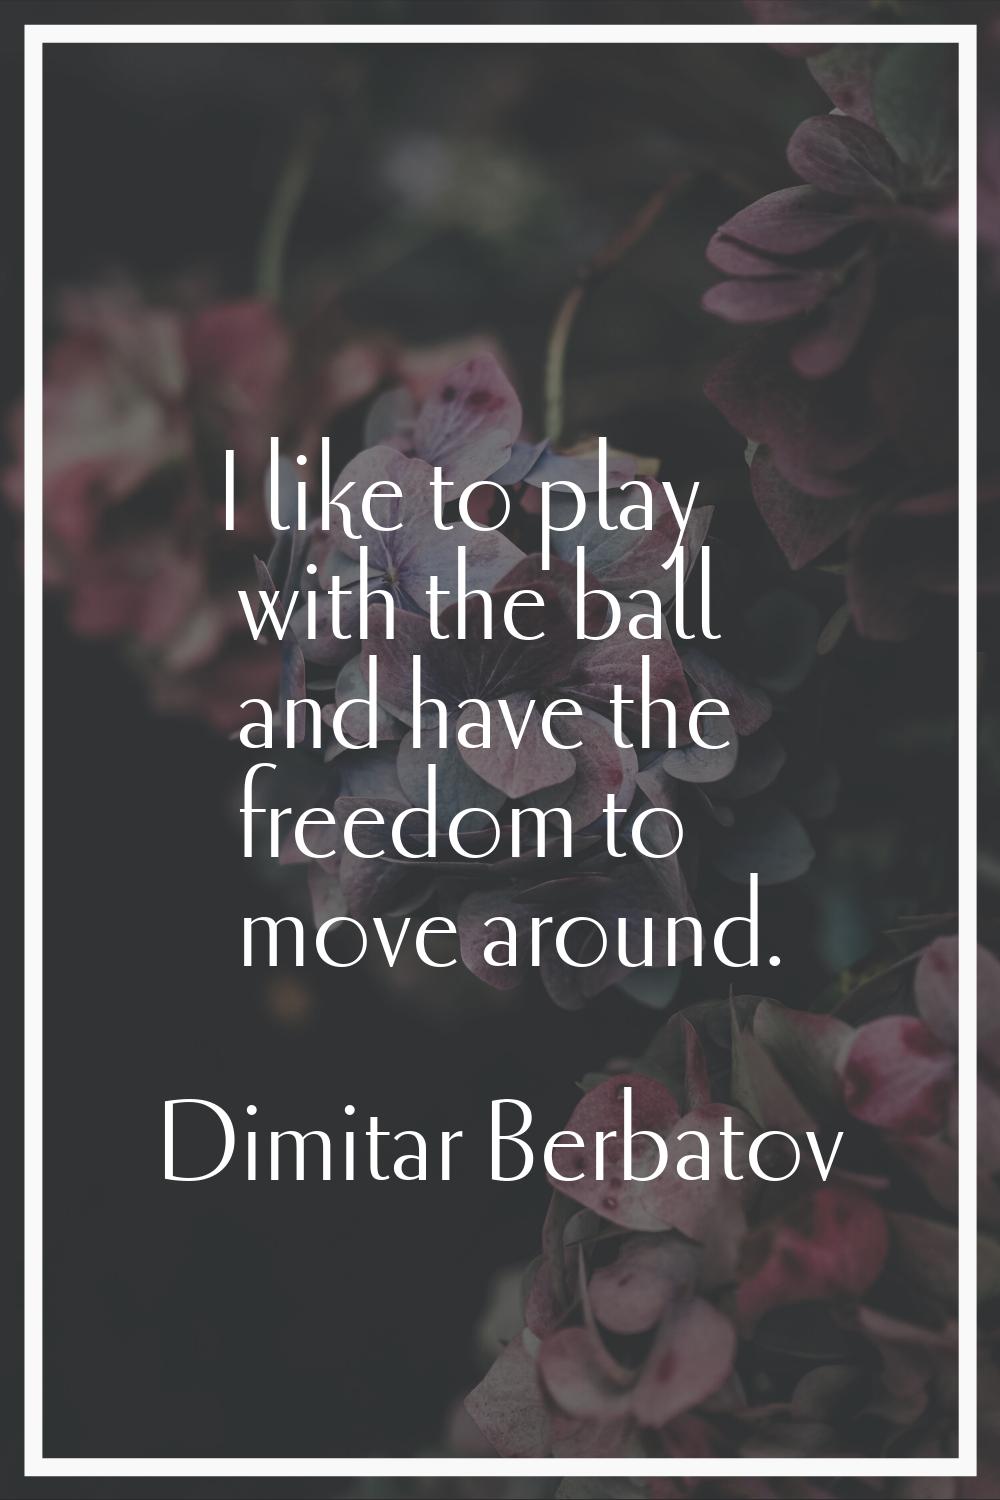 I like to play with the ball and have the freedom to move around.